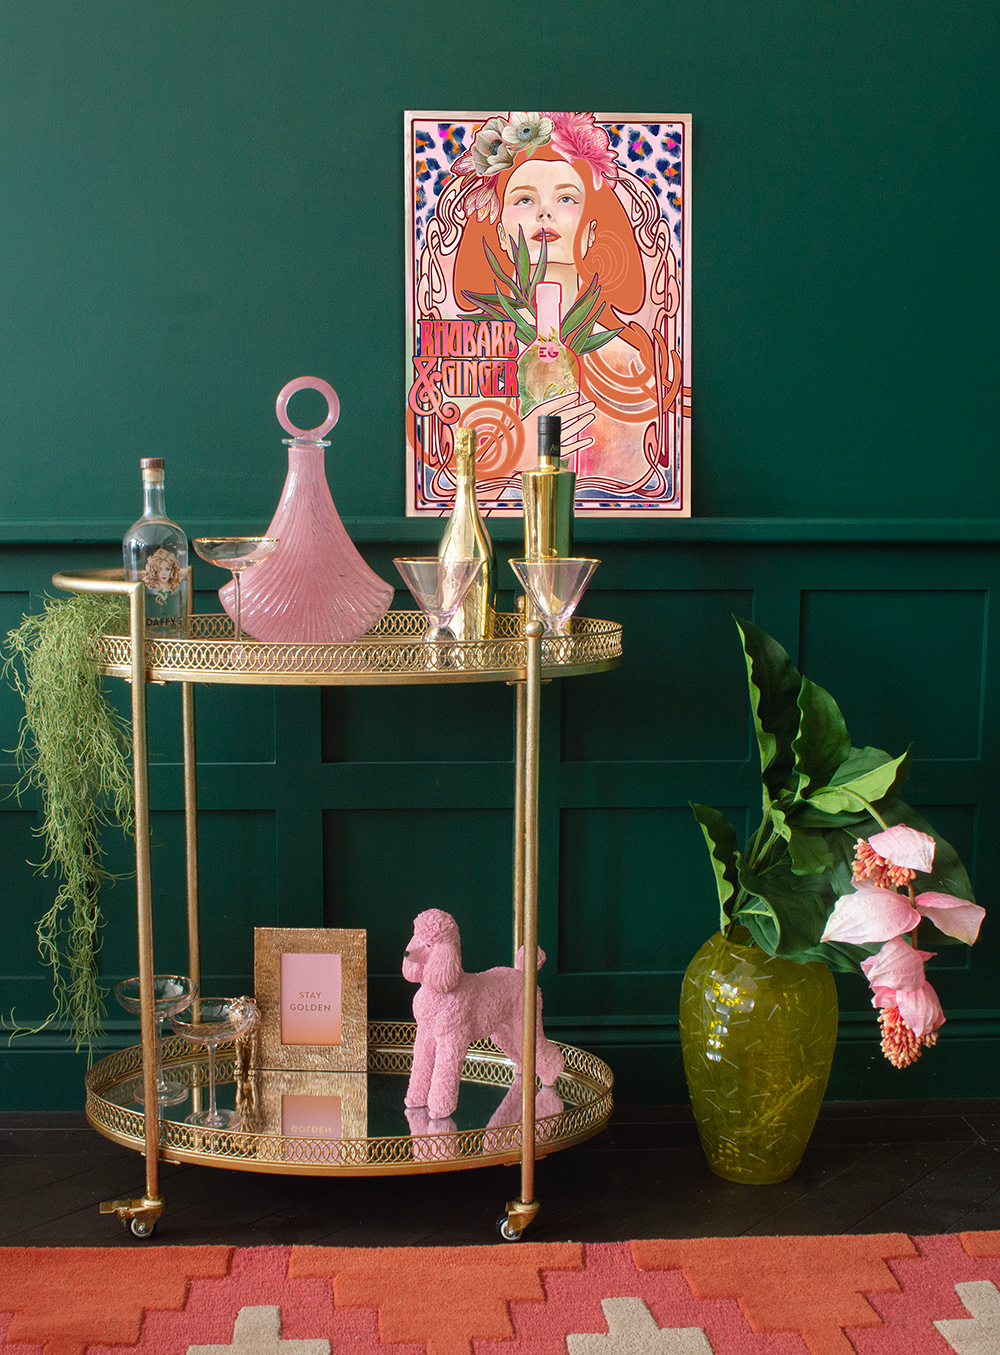 Create your own home bar with his gorgeous antique gold bar cart. Styled with pink glassware, faux plants and a colourful art print